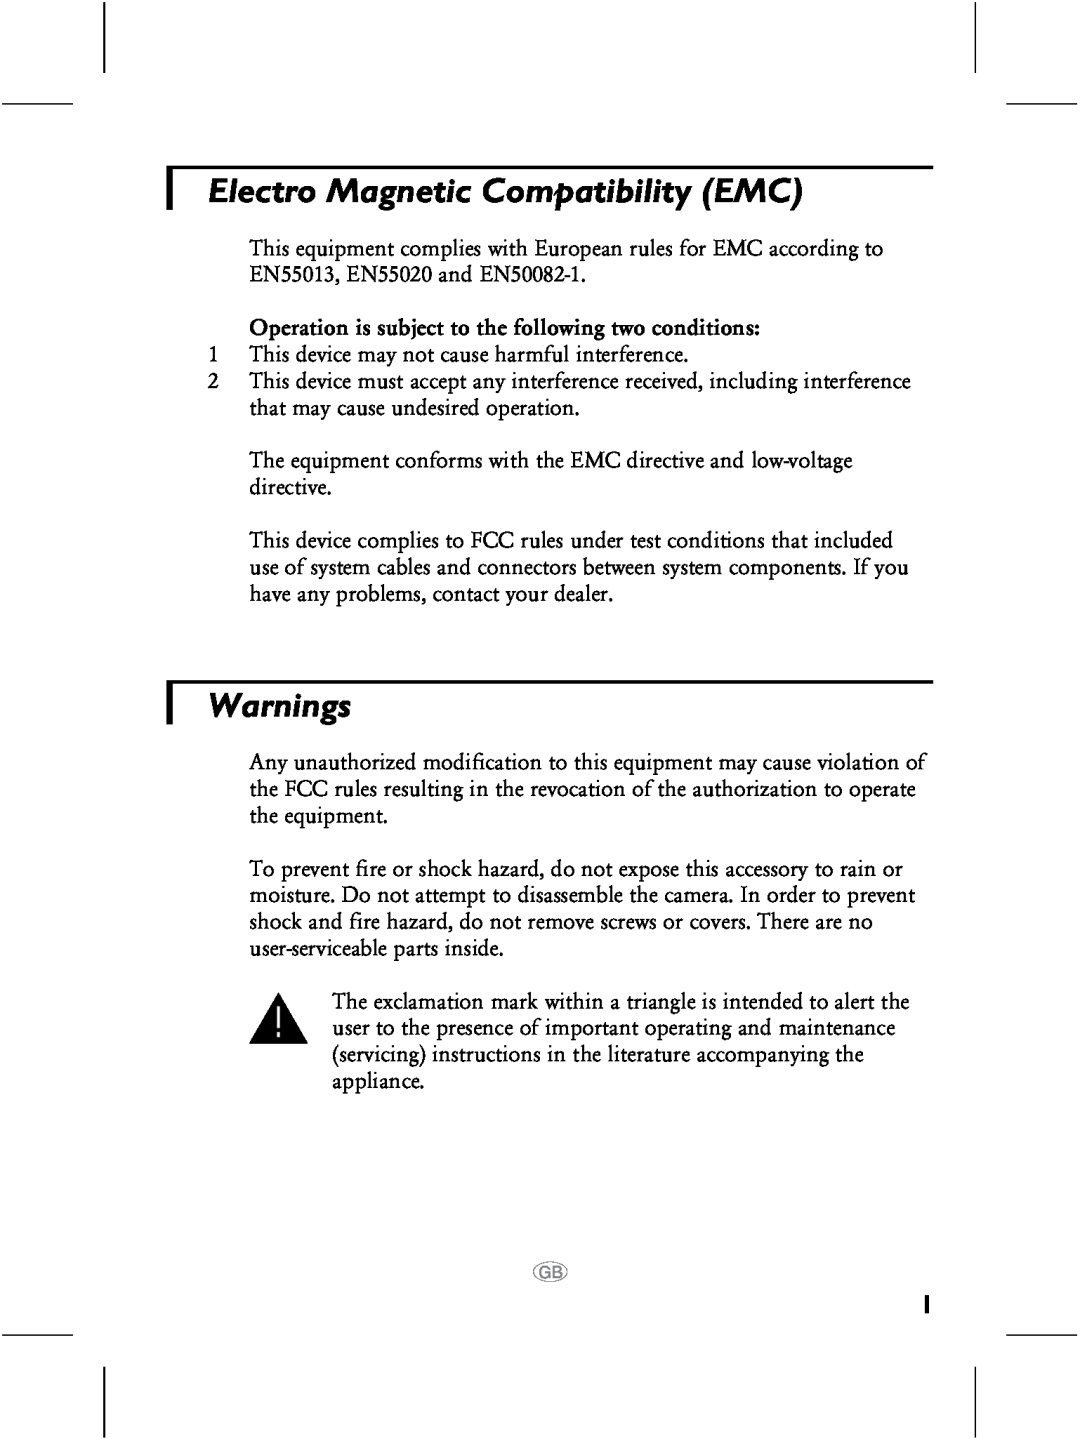 Philips CCD dimensions Electro Magnetic Compatibility EMC, Warnings 